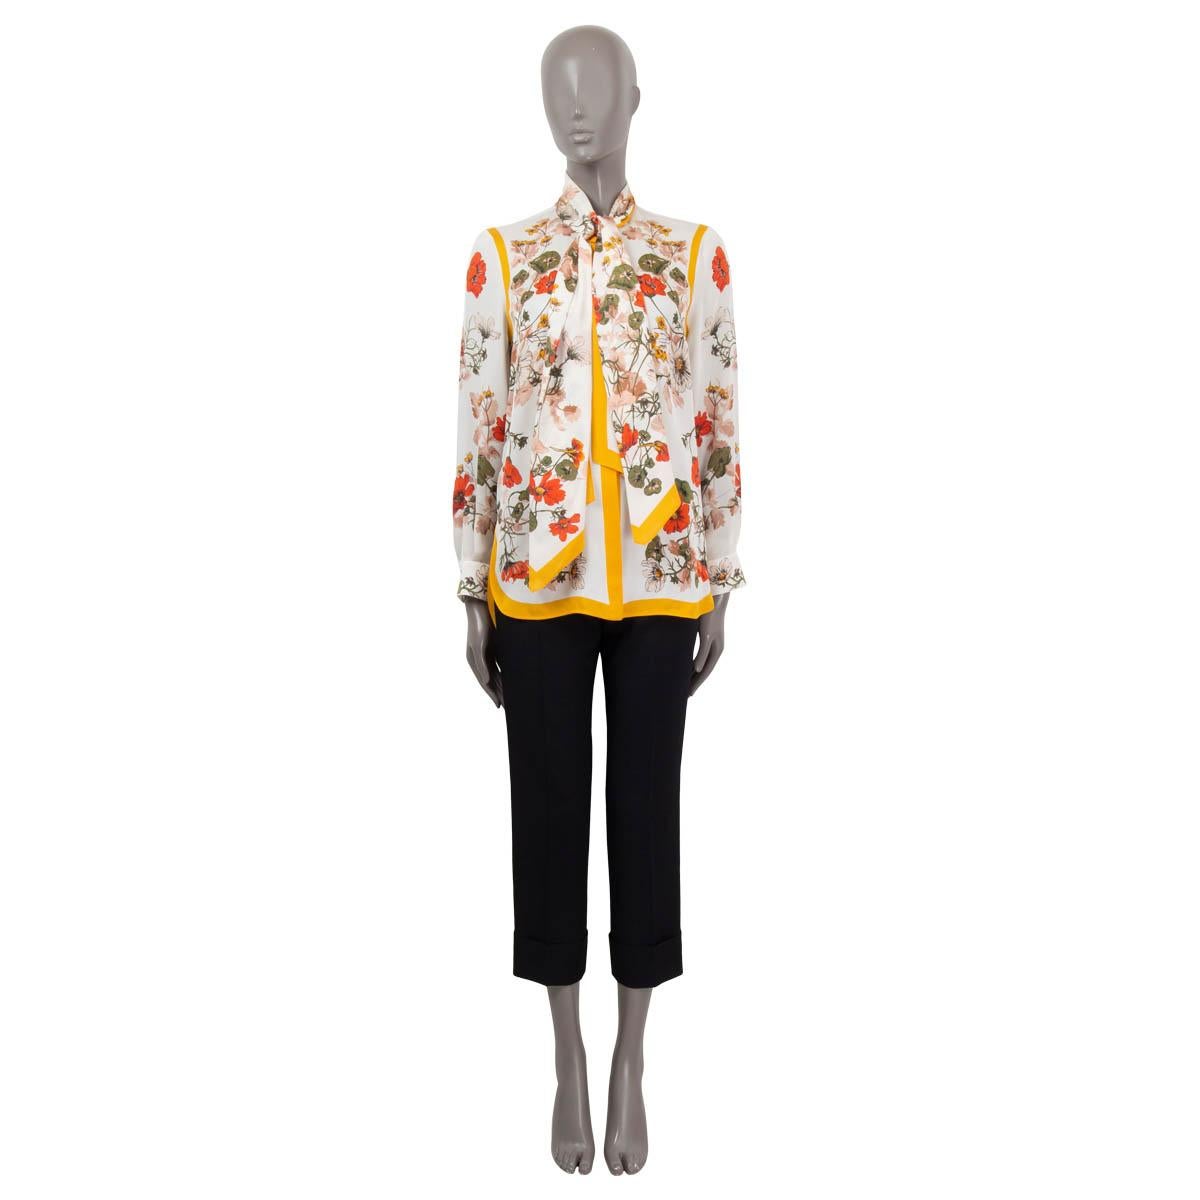 100% authentic Alexander McQueen blouse in off-white crepe de chine silk (100%) with floral-print in olive, yellow and orange. Hidden buttons and pussy-bow around the neck. Has been worn and is in excellent condition. 

Measurements
Tag